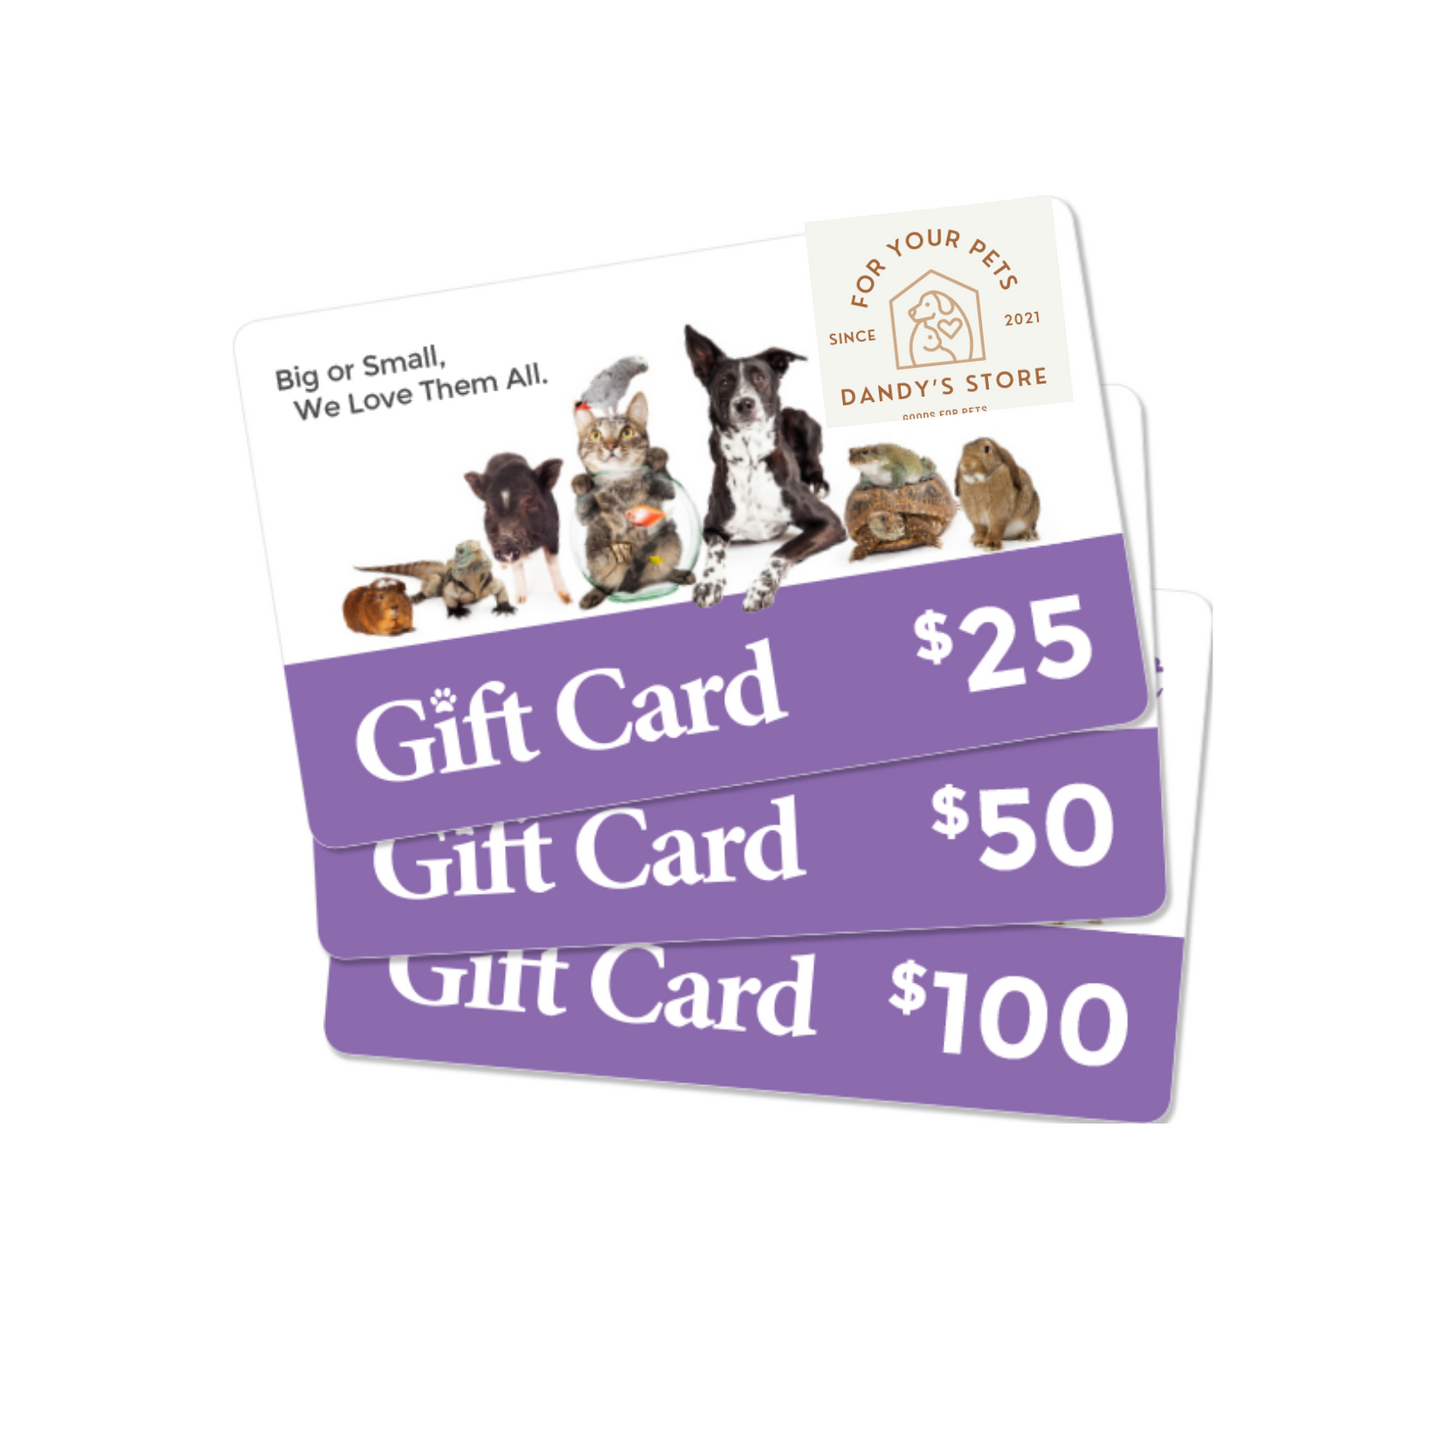 Dandy's Store GIFT CARD